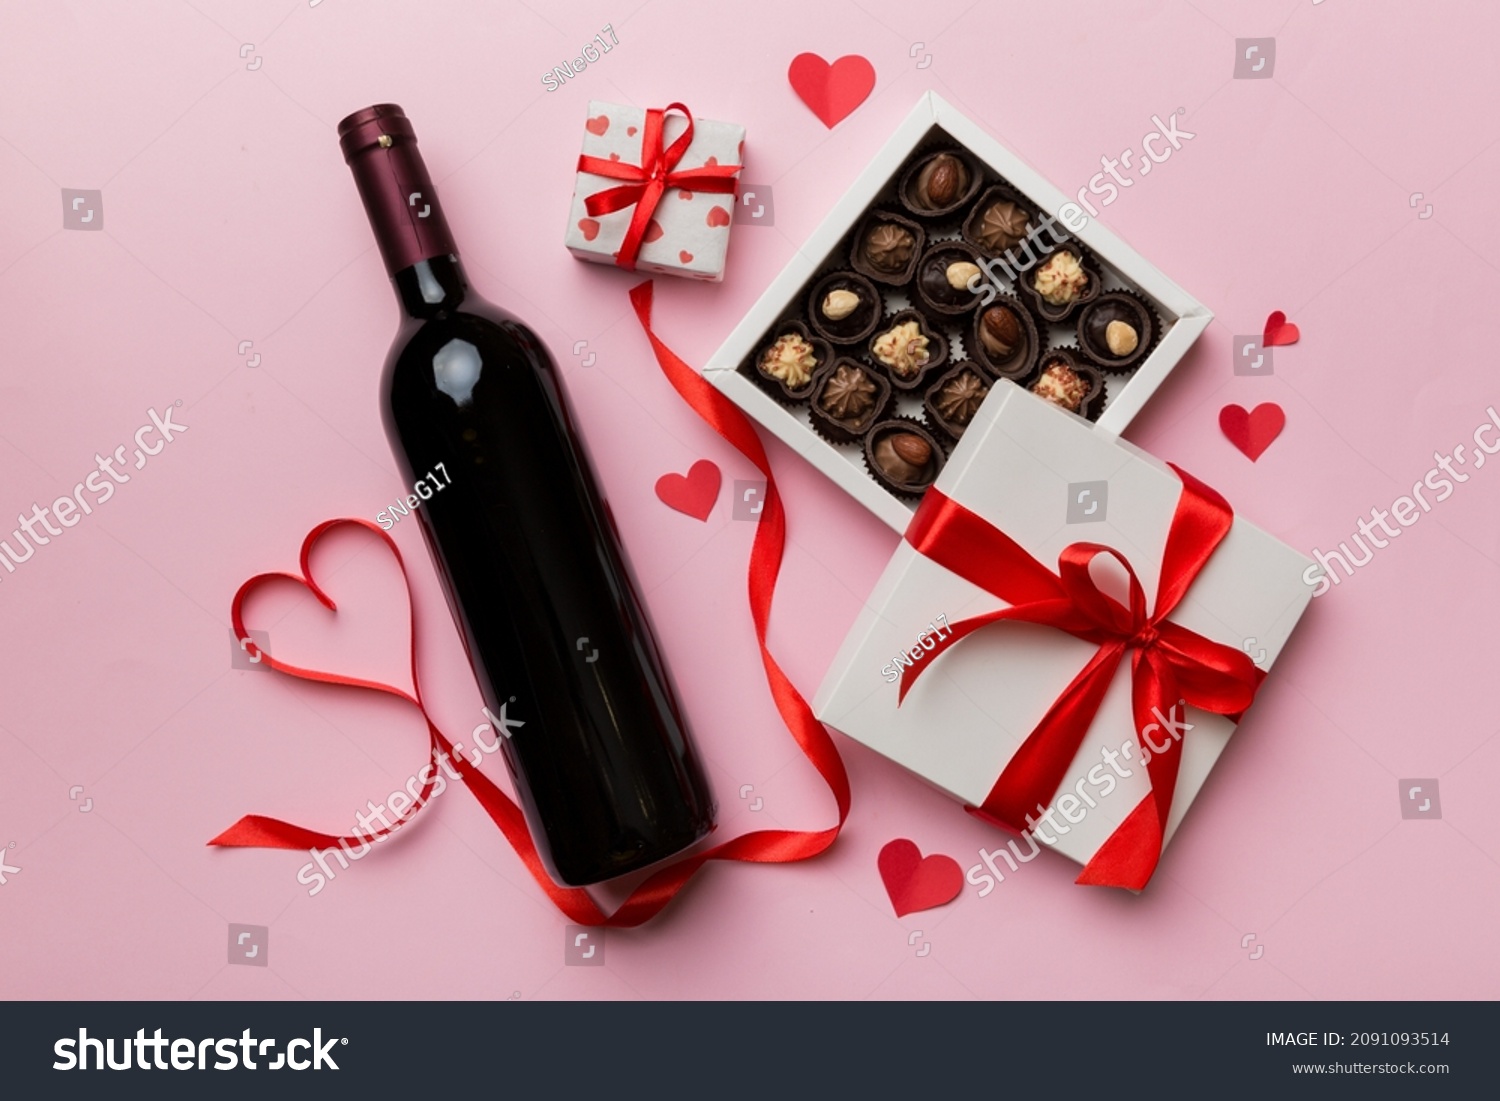 Bottle of red wine on colored background for Valentine Day with gift and chocolate. Heart shaped with gift box of chocolates top view with copy space. #2091093514